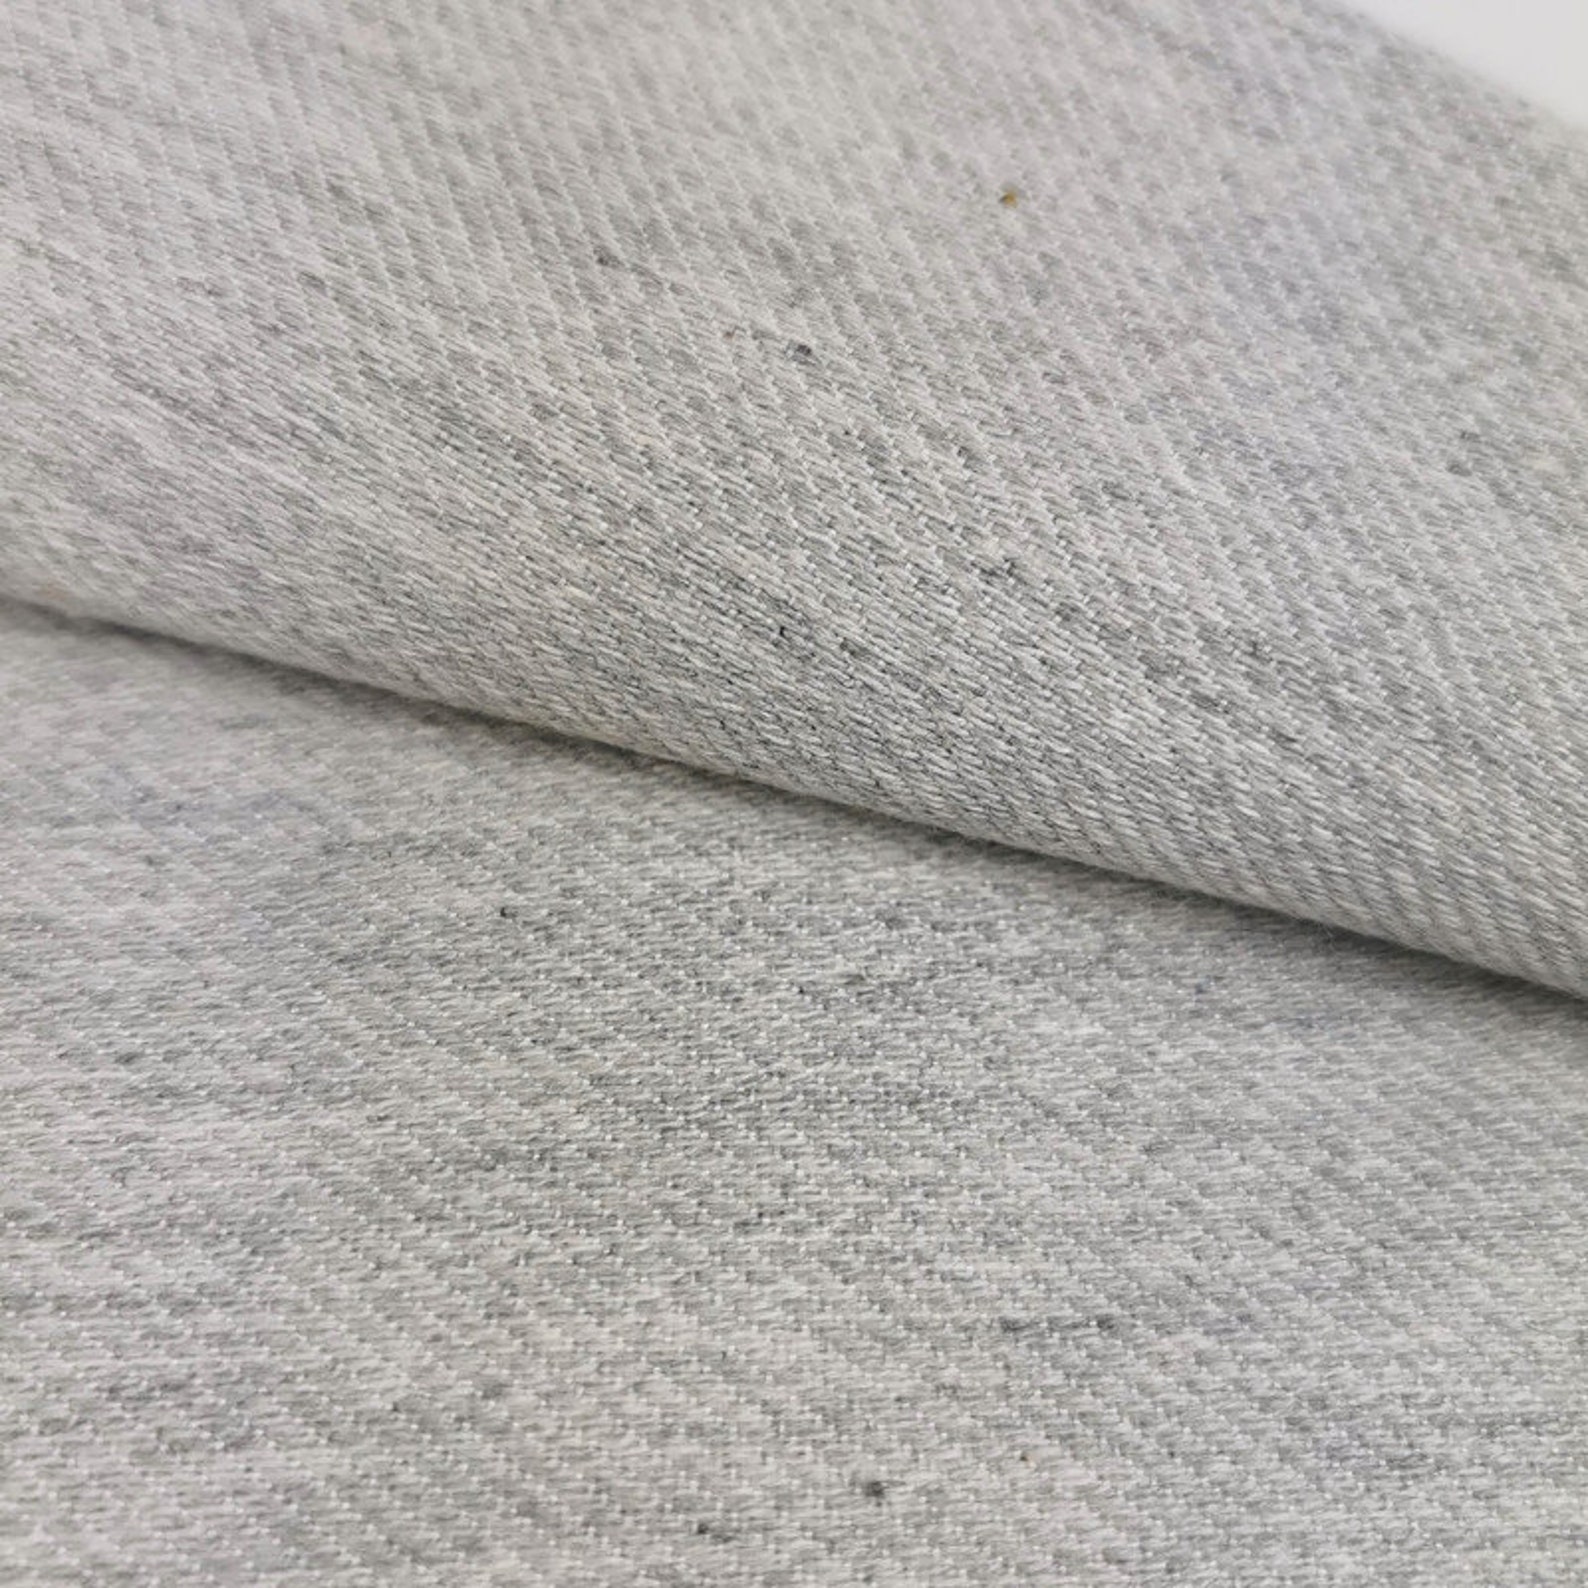 Gray Denim Fabric by the Yard Jeans Cotton Fabric Jeans - Etsy